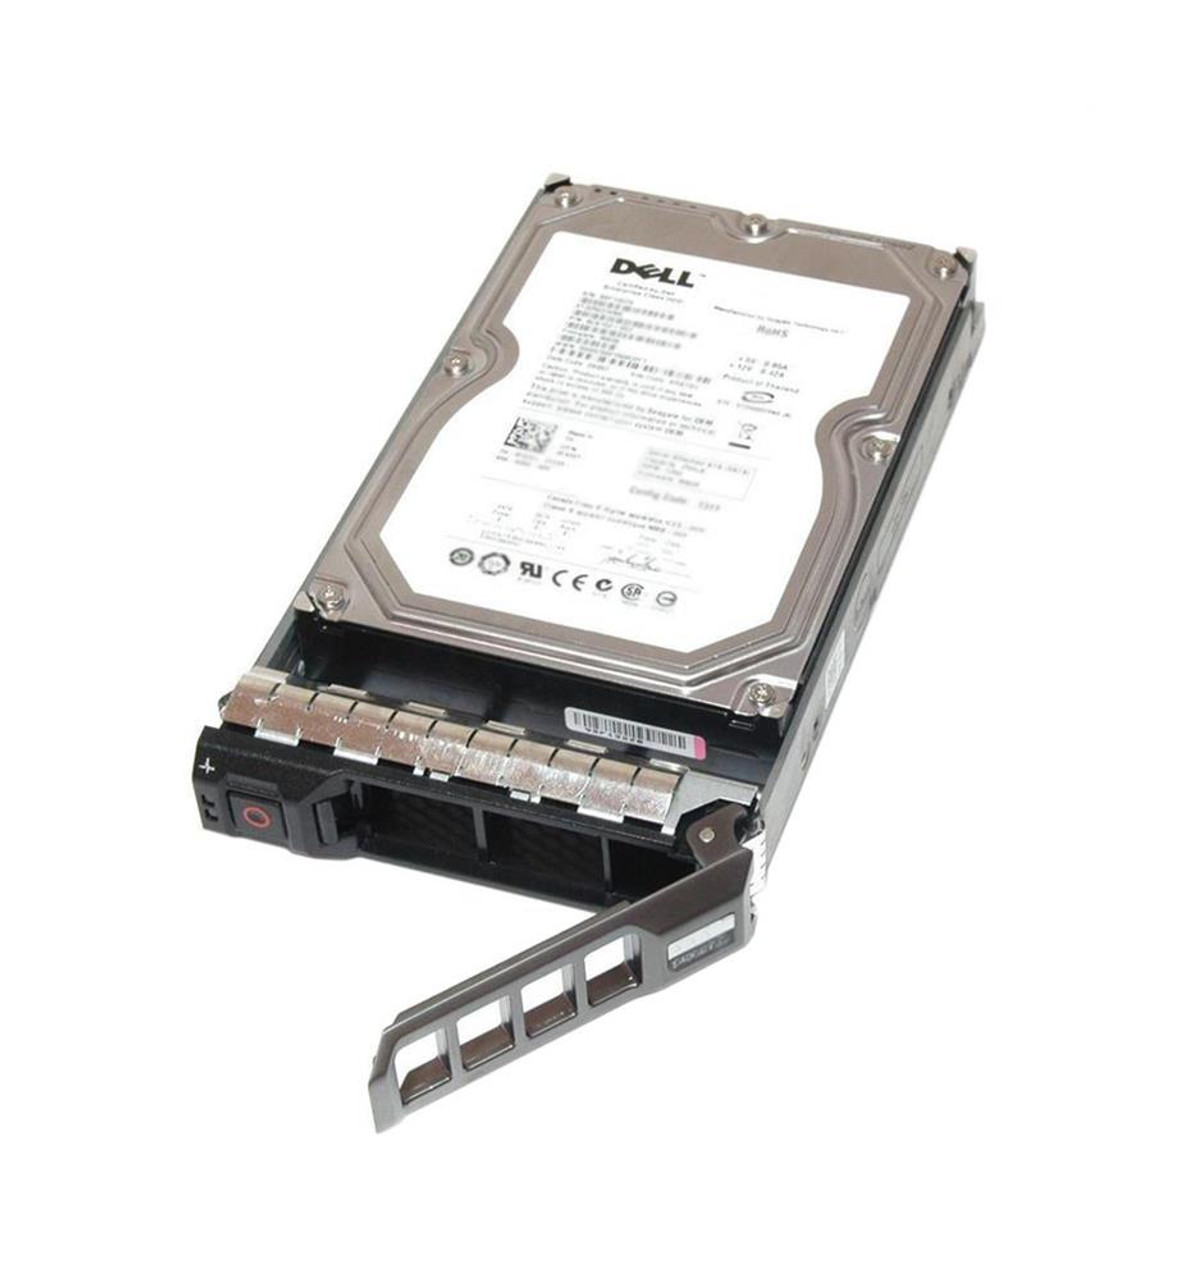 XWC81 Dell 1TB 7200RPM SAS 12Gbps Nearline Hot Swap (512n) 3.5-inch Internal Hard Drive with Tray